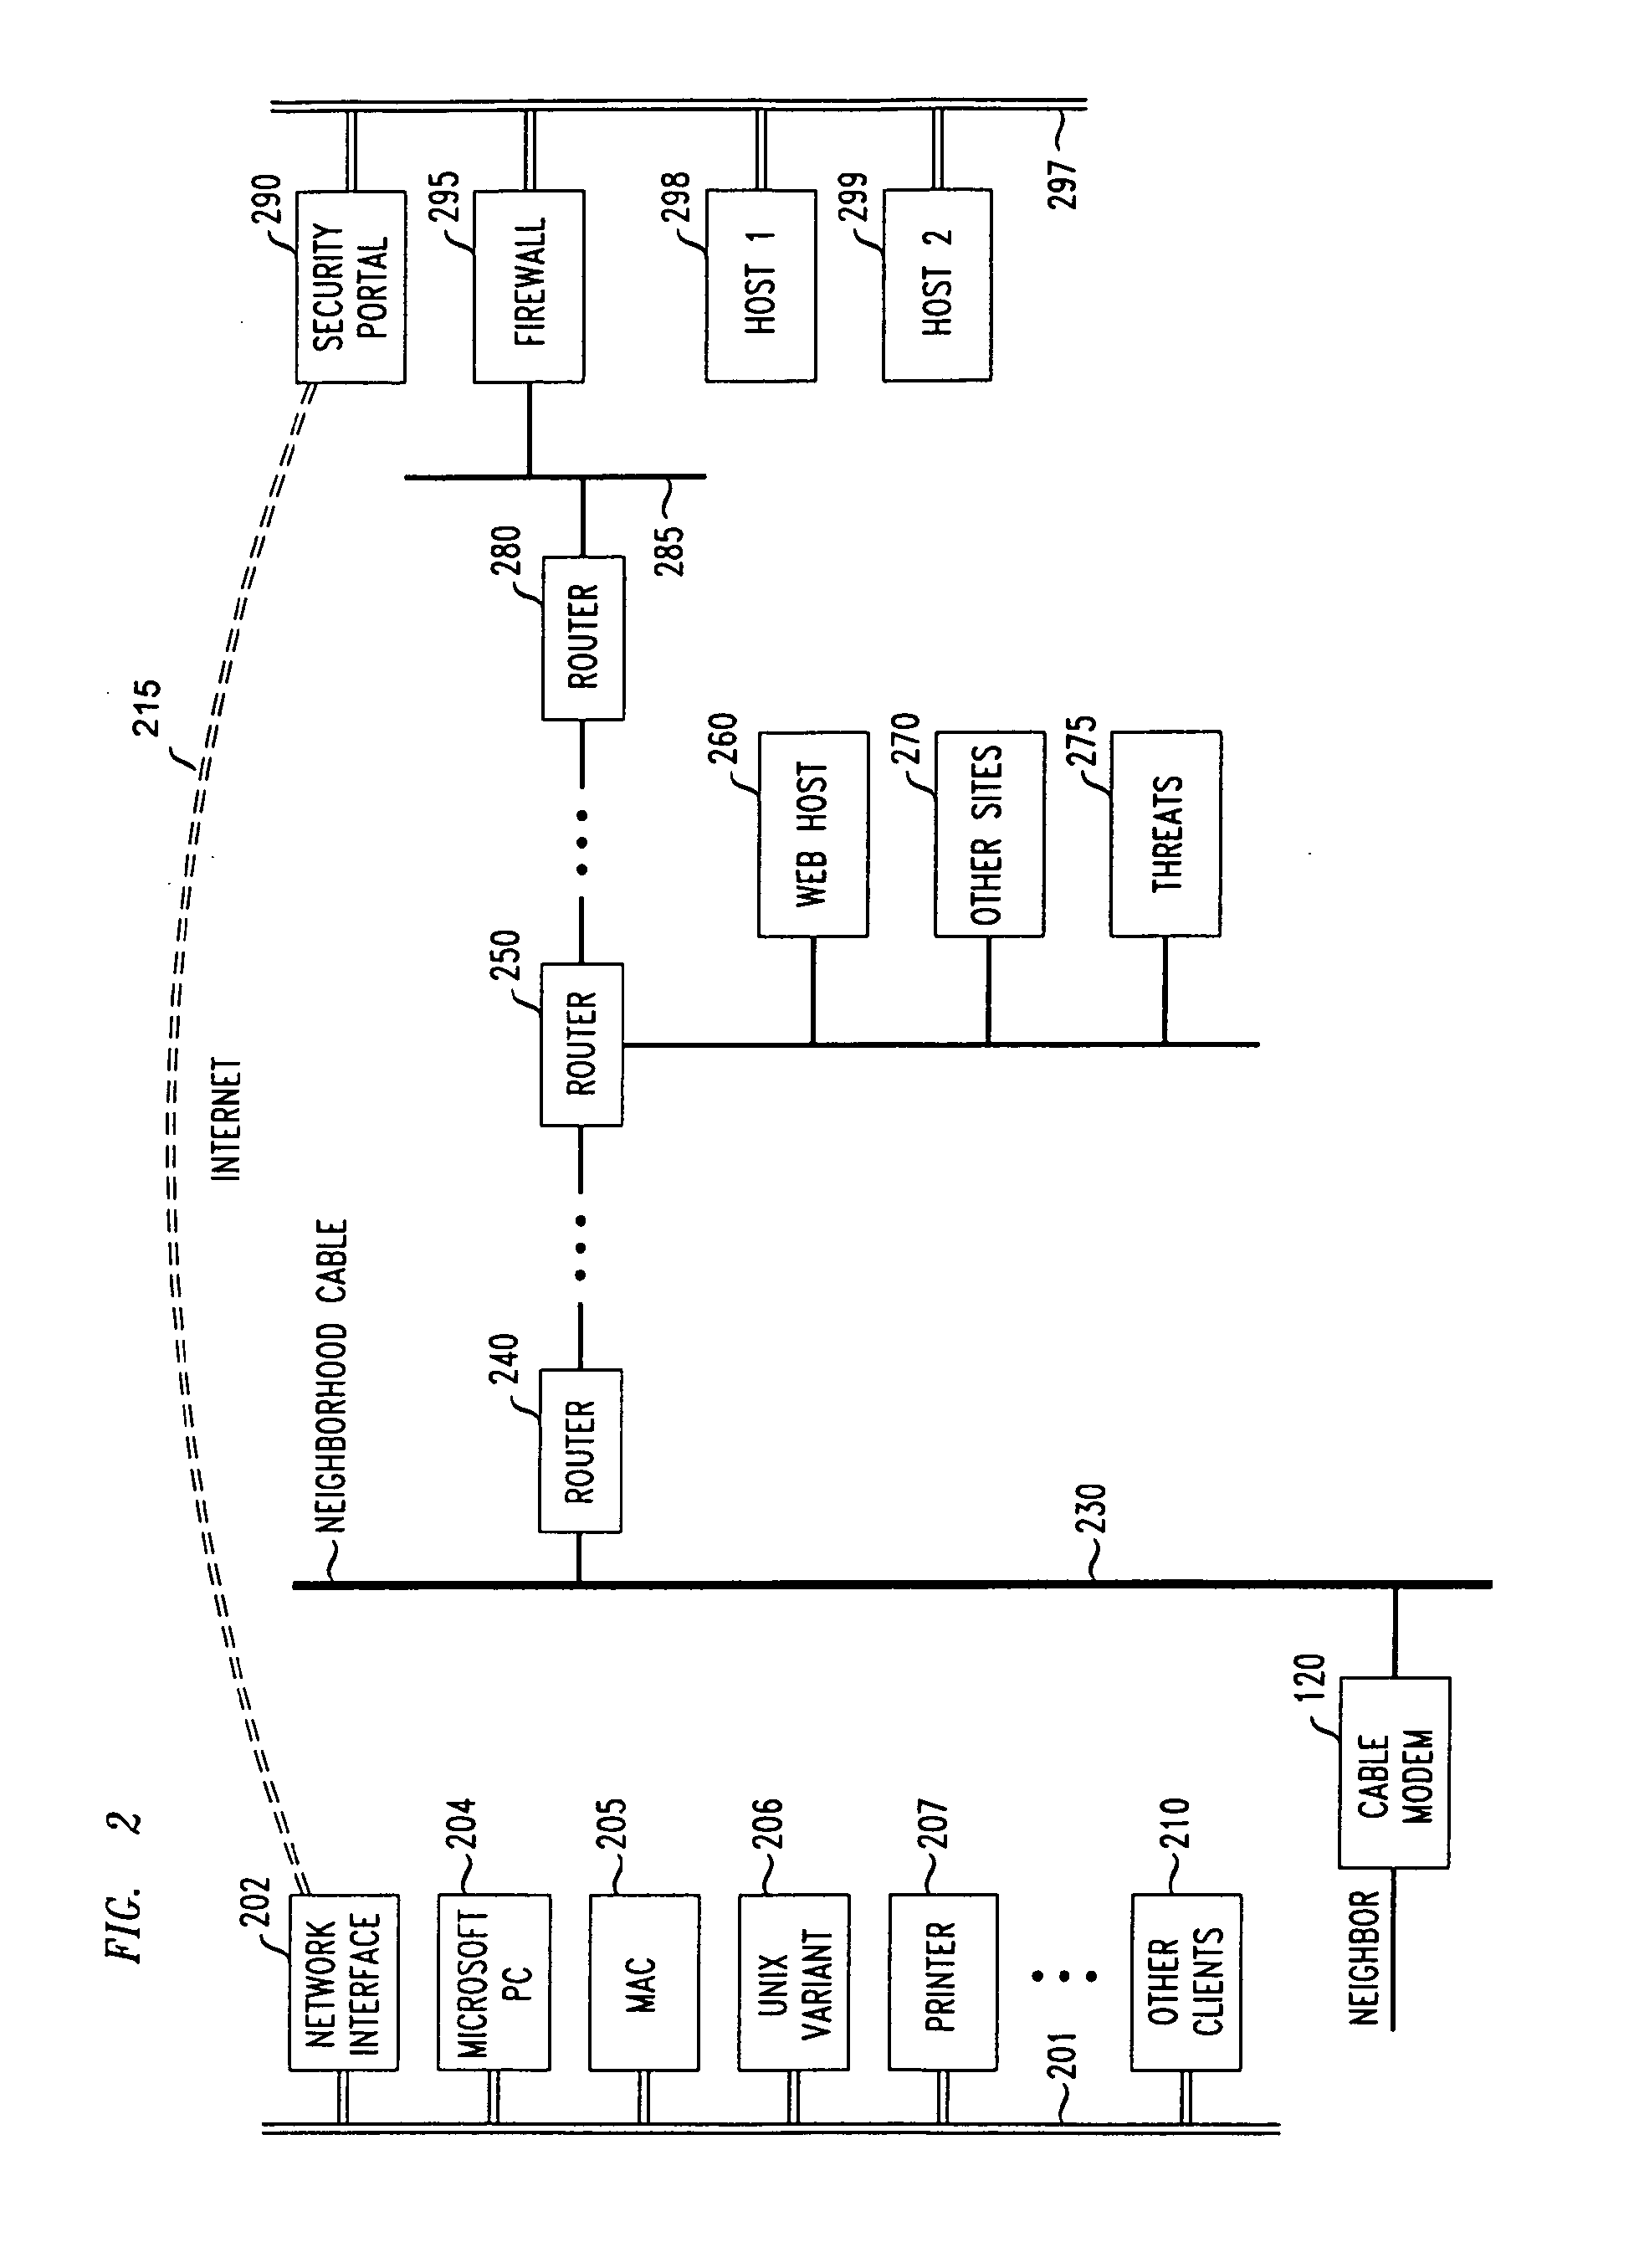 Method and apparatus for connection to virtual private networks for secure transactions